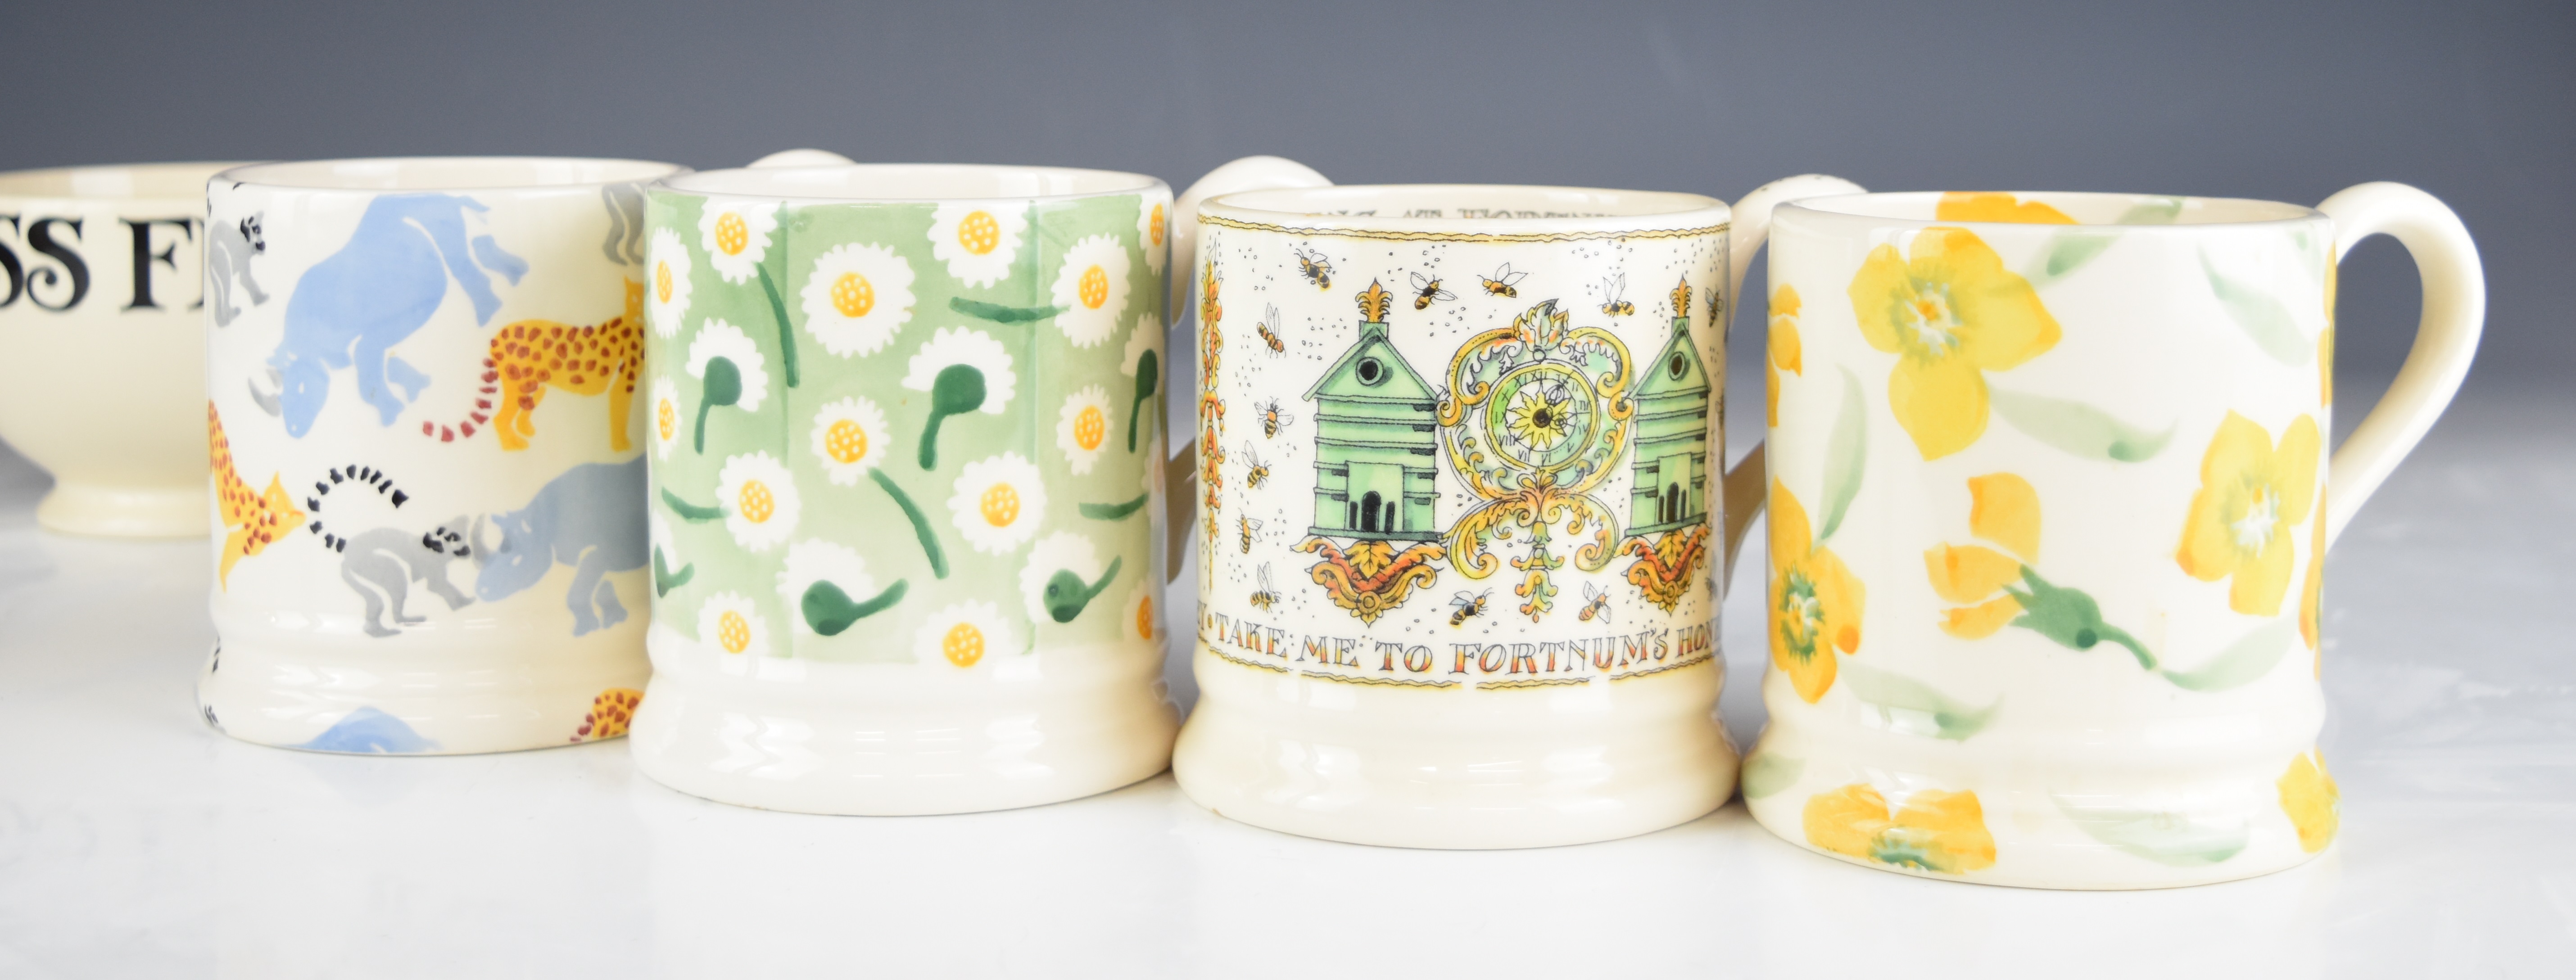 Emma Bridgewater ceramics including a tazza with pansy decoration, mugs, cups and saucers, glasses - Image 16 of 18